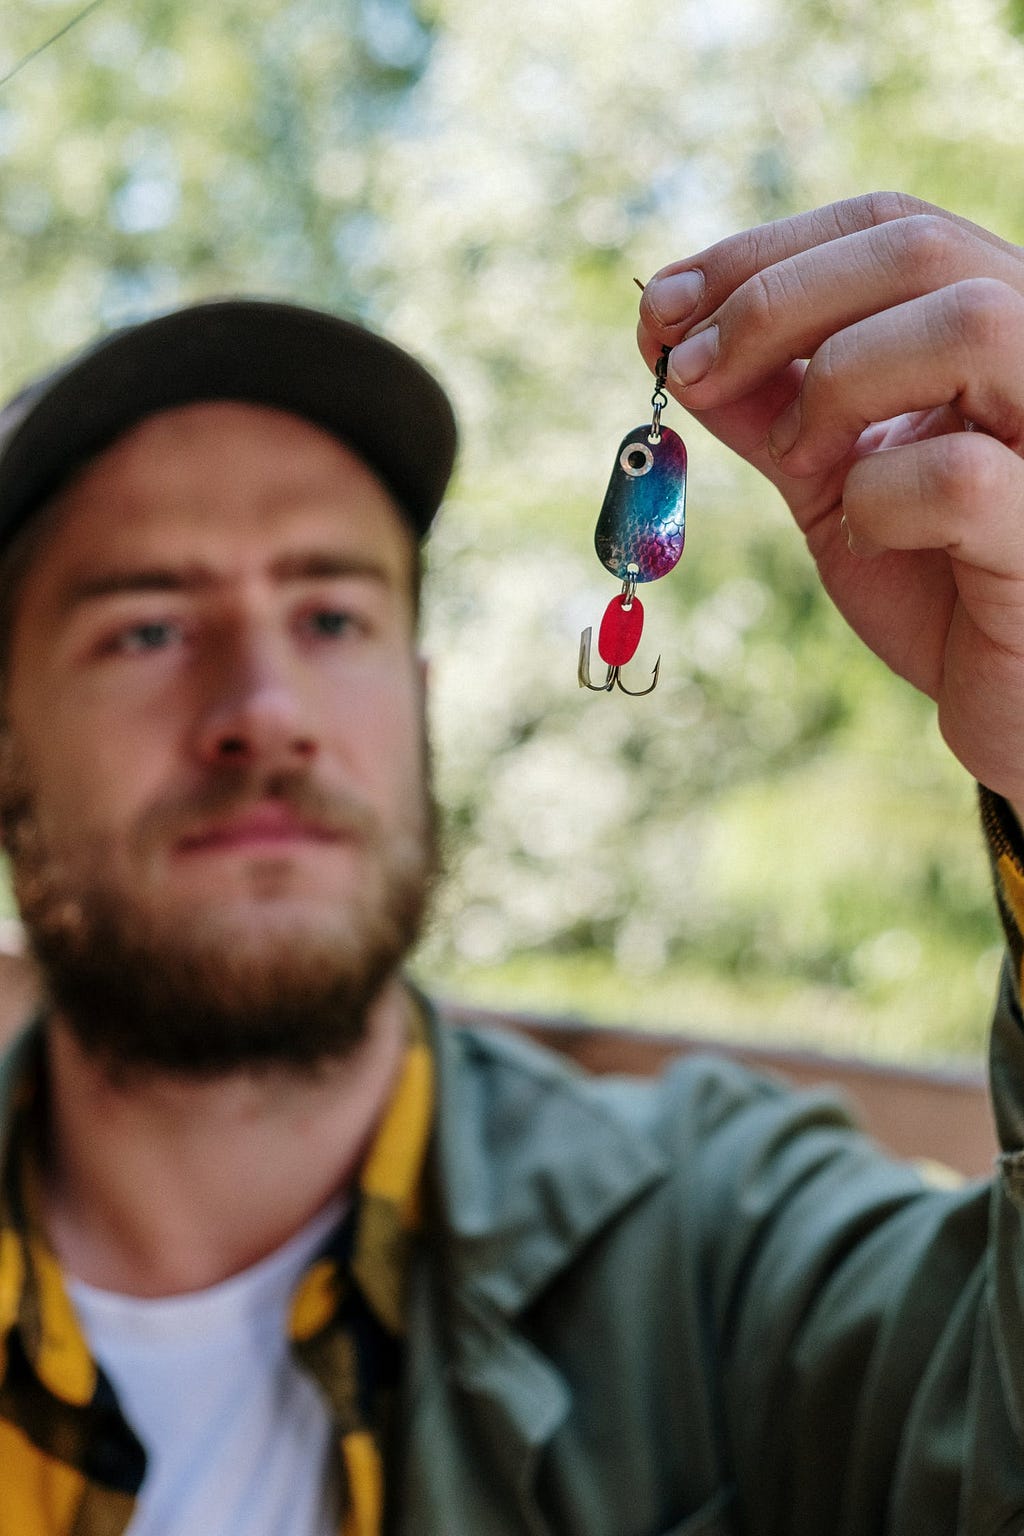 A shimmery blue and purple metal fishing lure with several hooks hanging from it is being held up close to the camera by a somewhat out of focus  white bearded male wearing a green jacket with a black and yellow plaid shirt underneath.